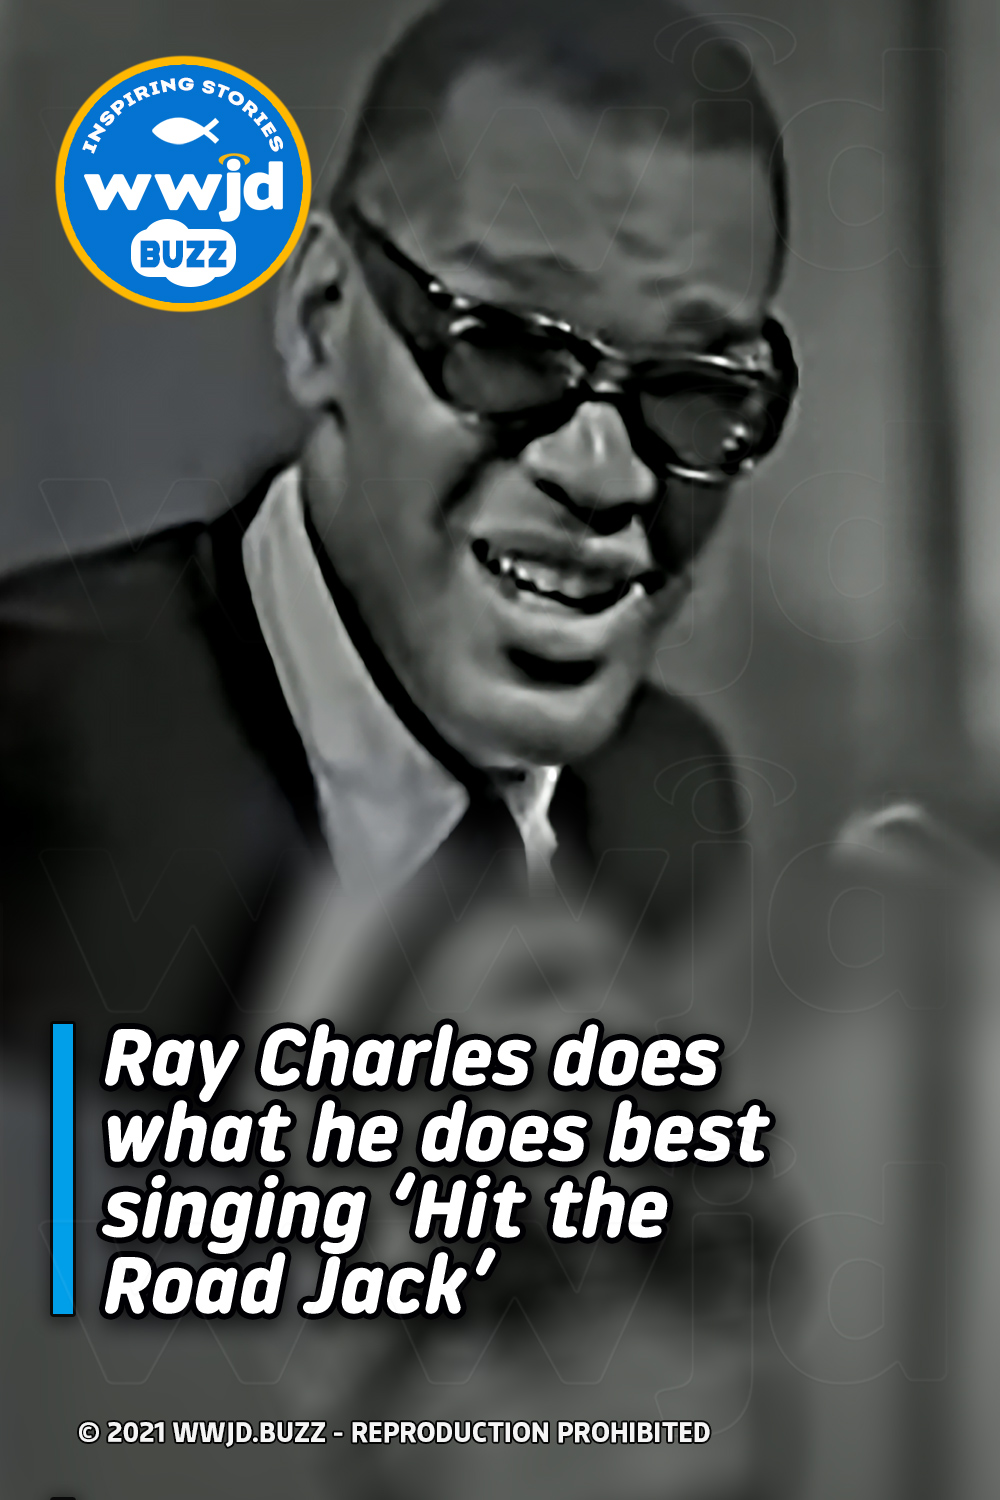 Ray Charles does what he does best singing ‘Hit the Road Jack’